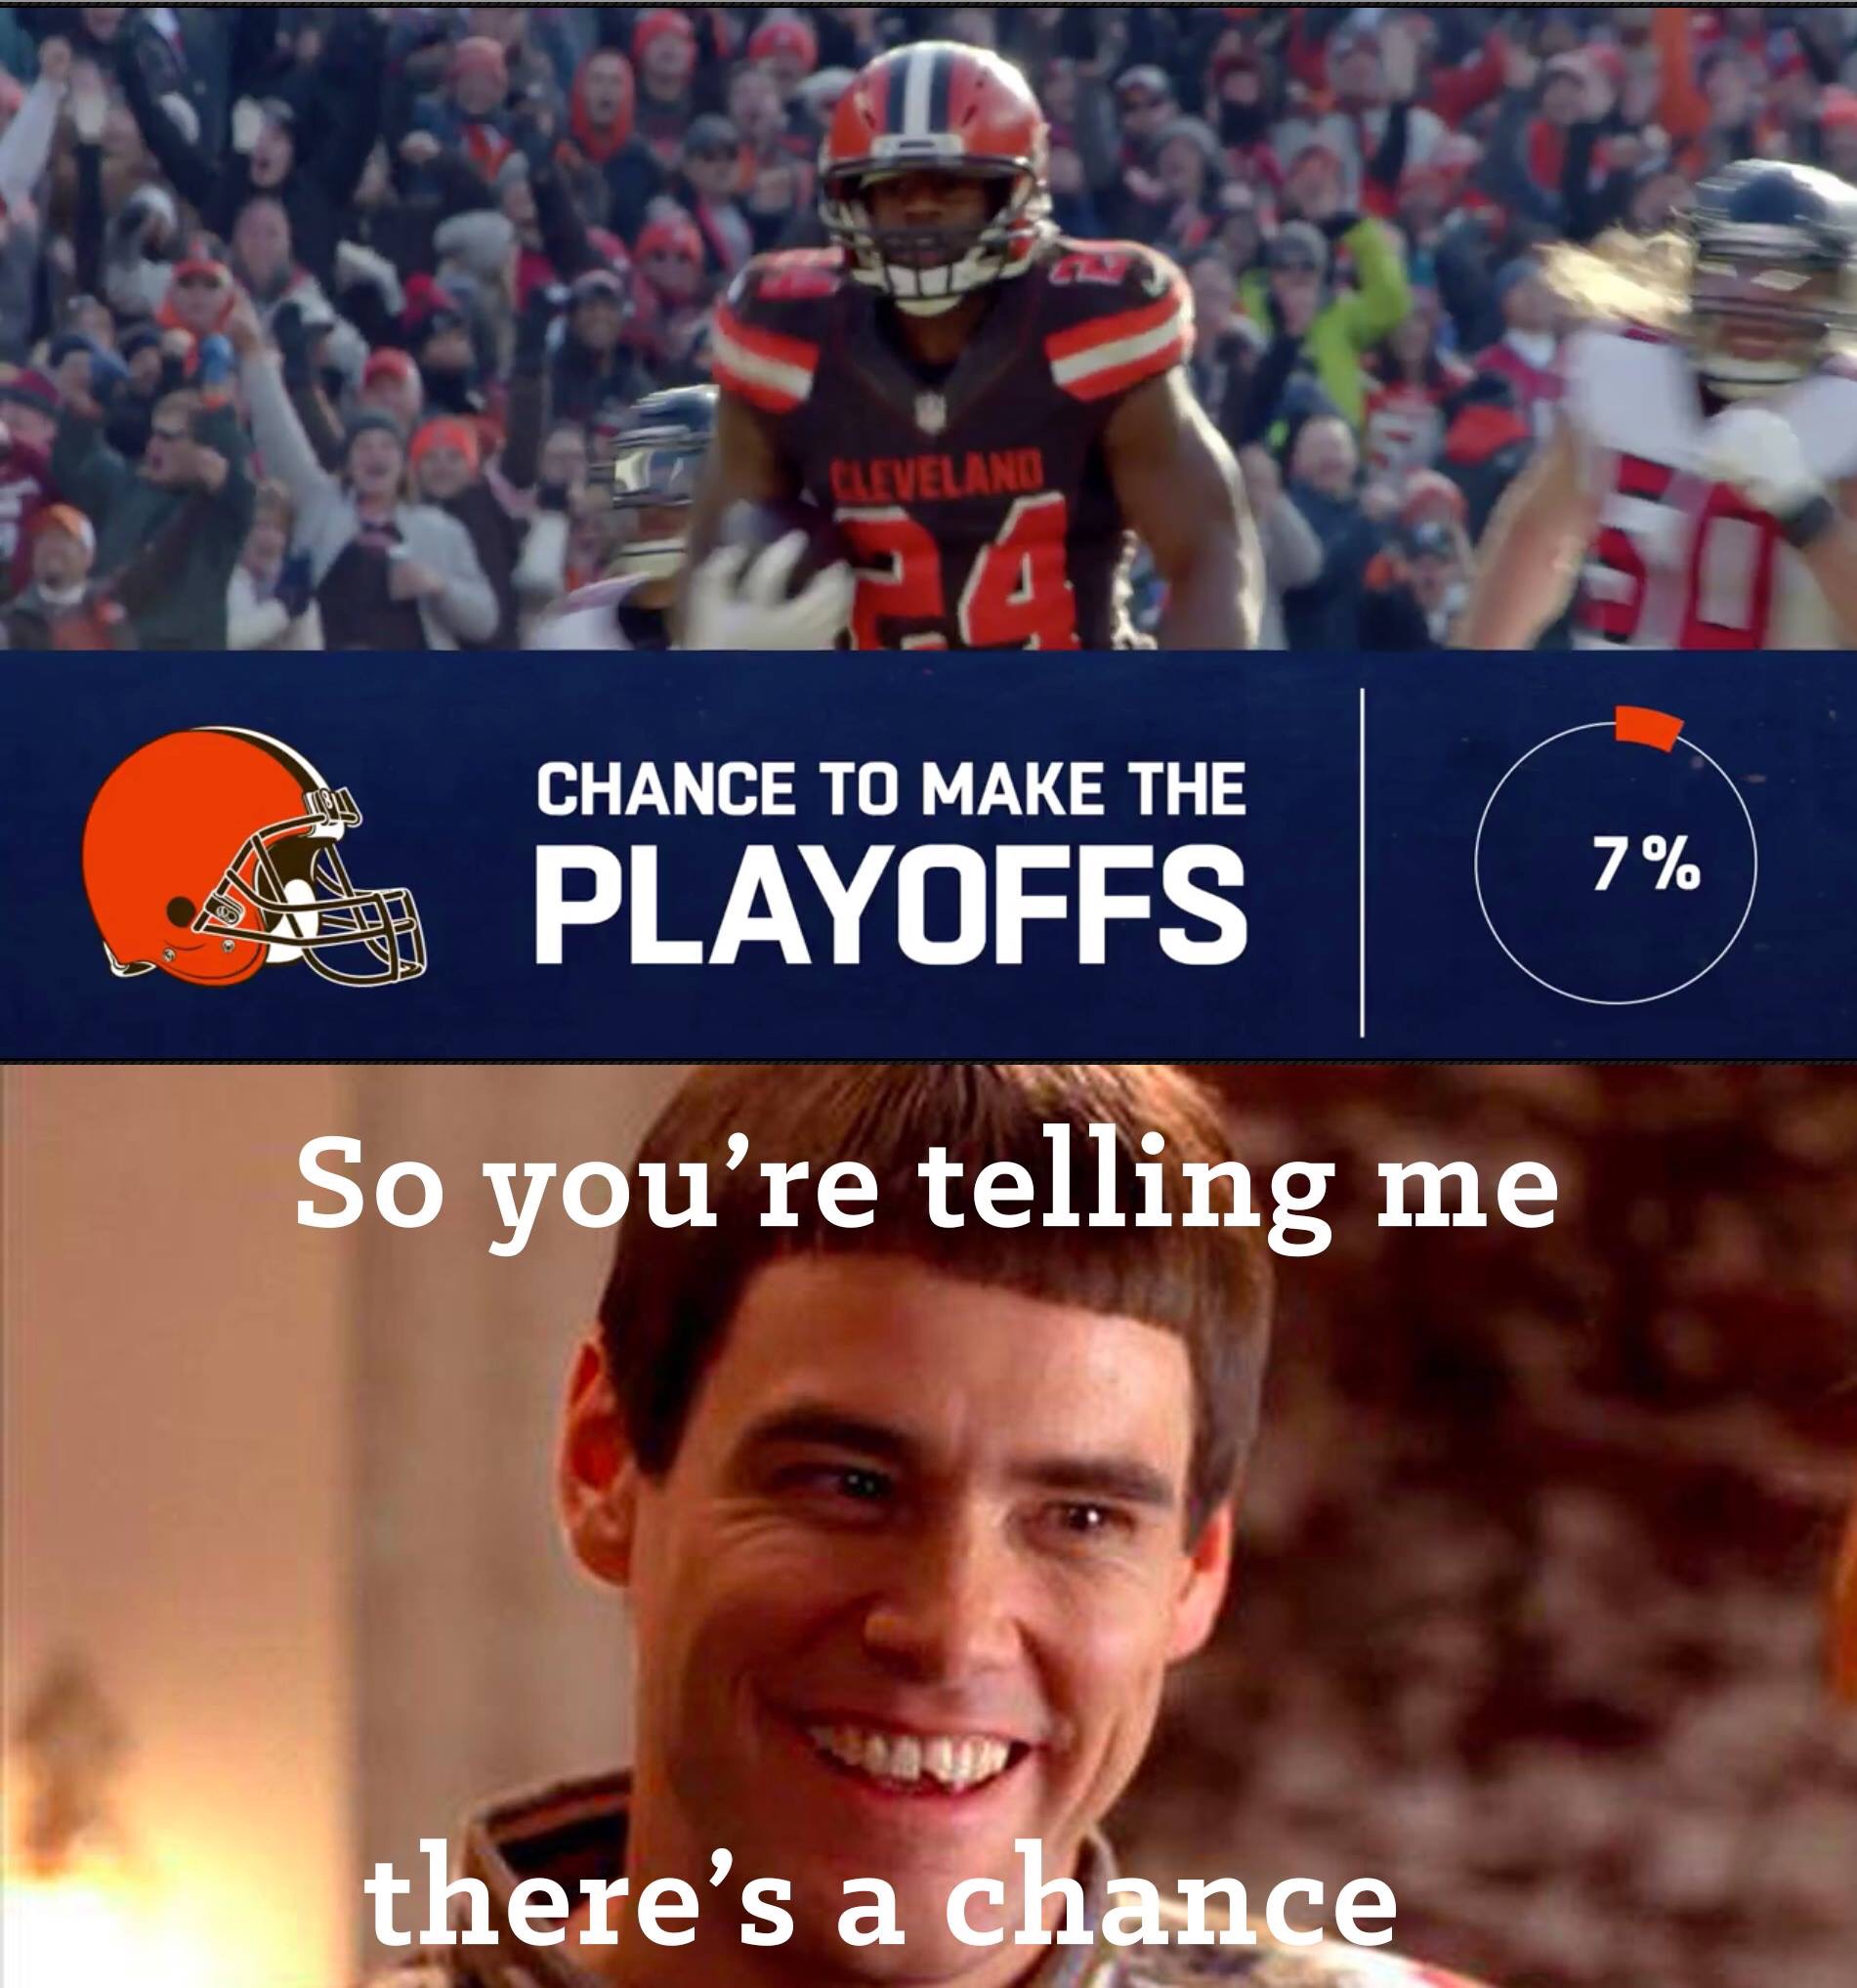 so you re saying there's - Cleveland Chance To Make The 7% Playoffs So you're telling me there's a chance